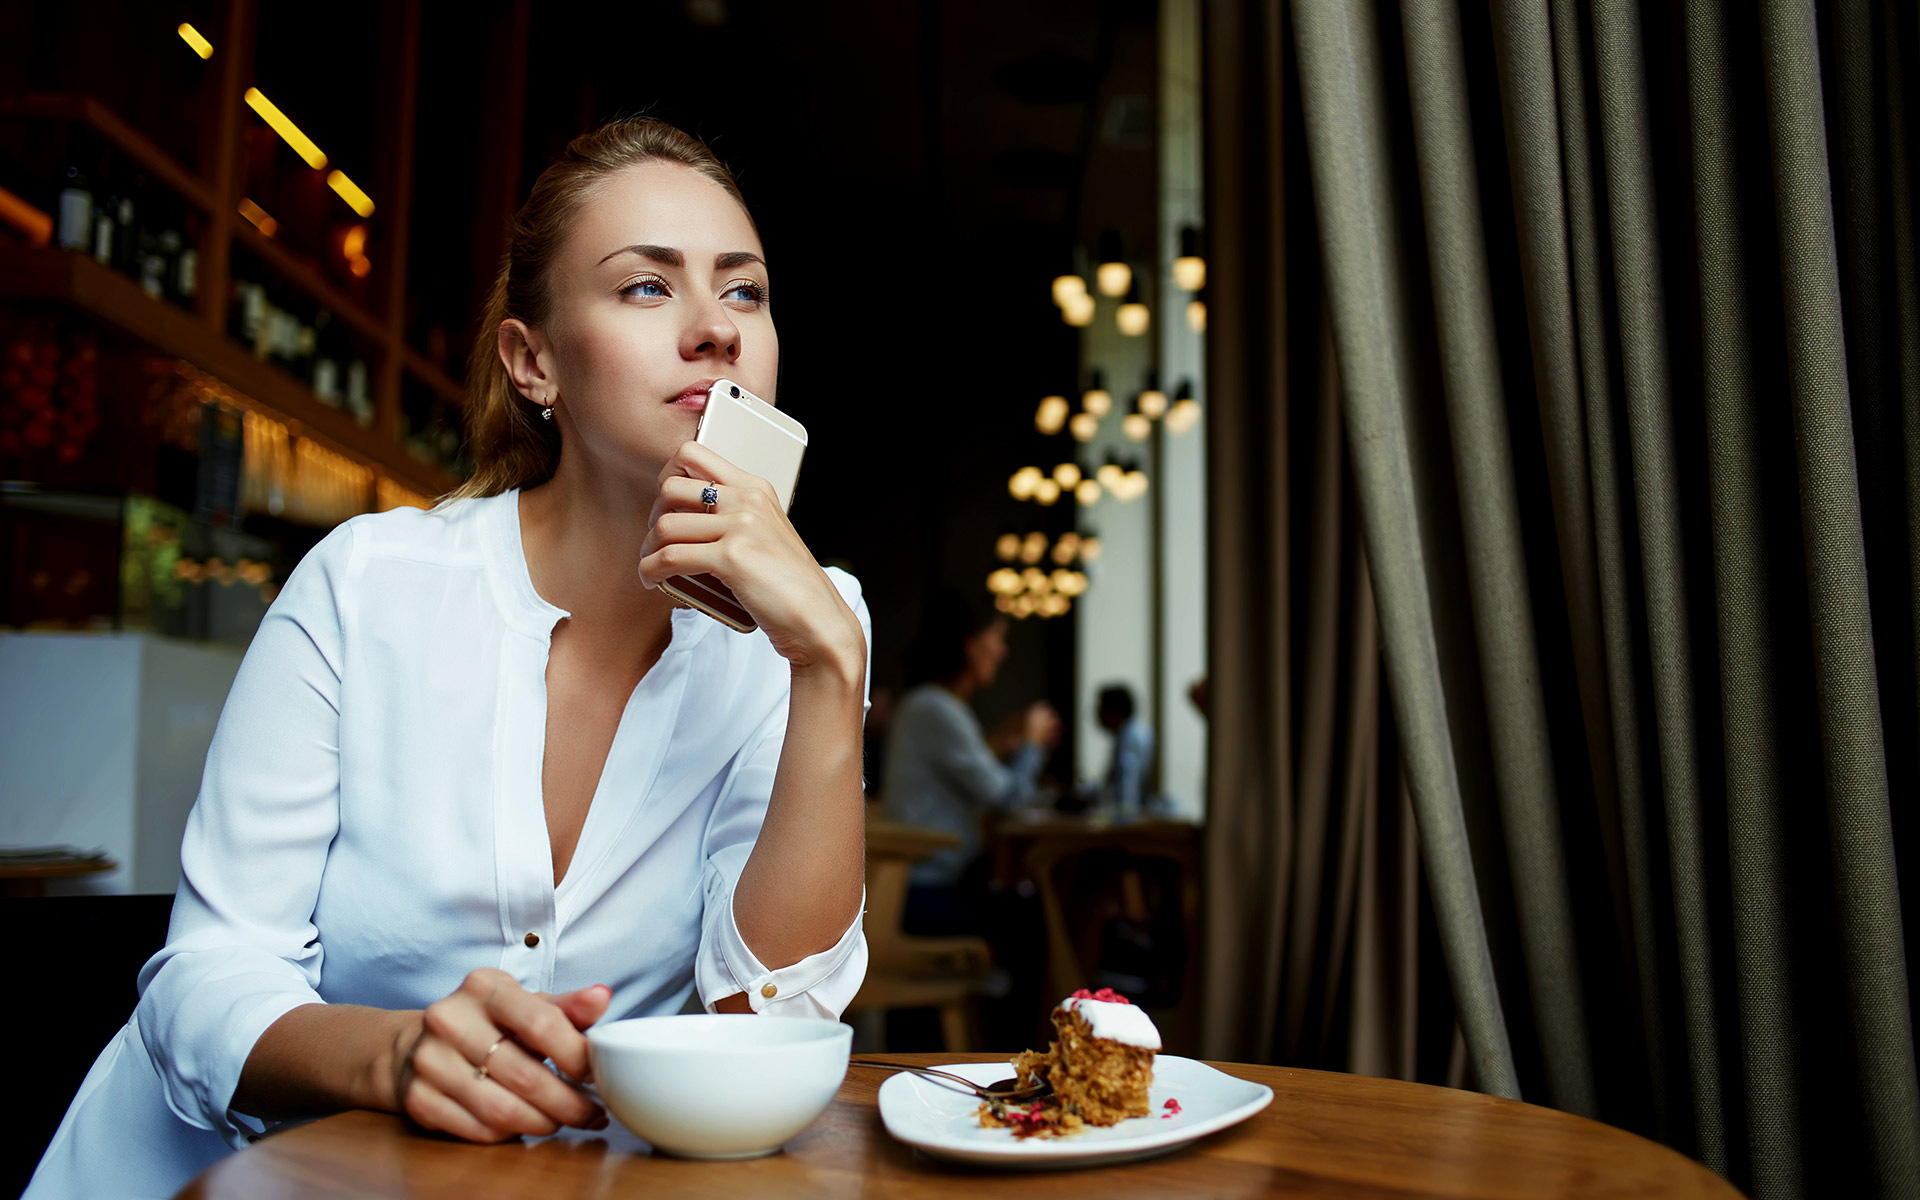 Blonde woman in white shirt holding her phone up to her lips while thinking. She is having a coffee and cake at a cafe.